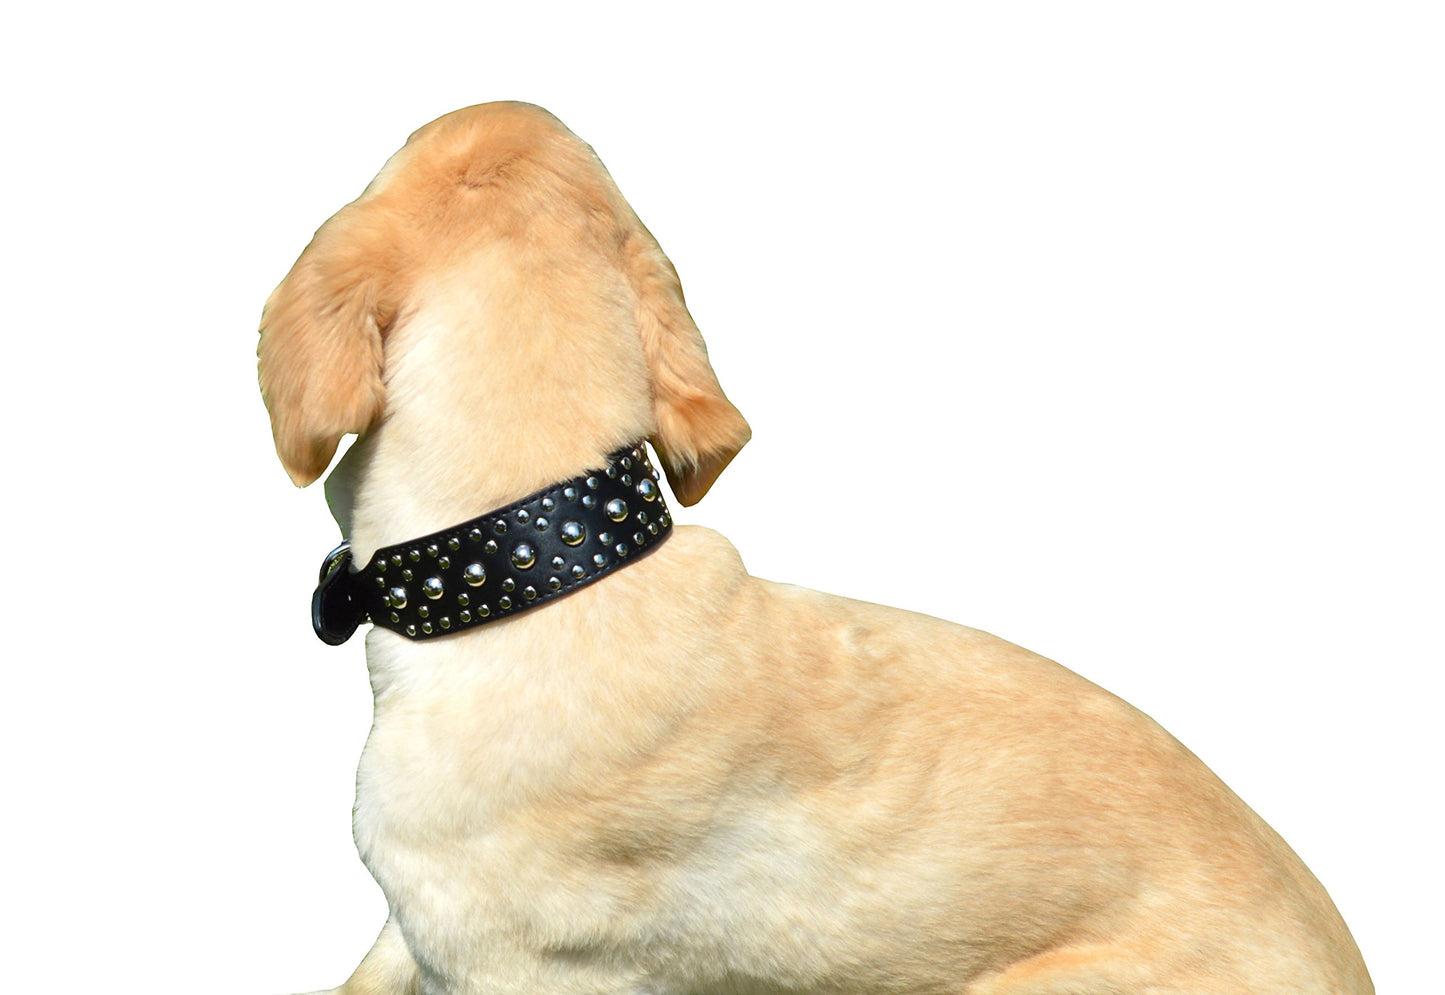 2" Wide Leather Spiked Dog Collar - Multi-Color and Size Options